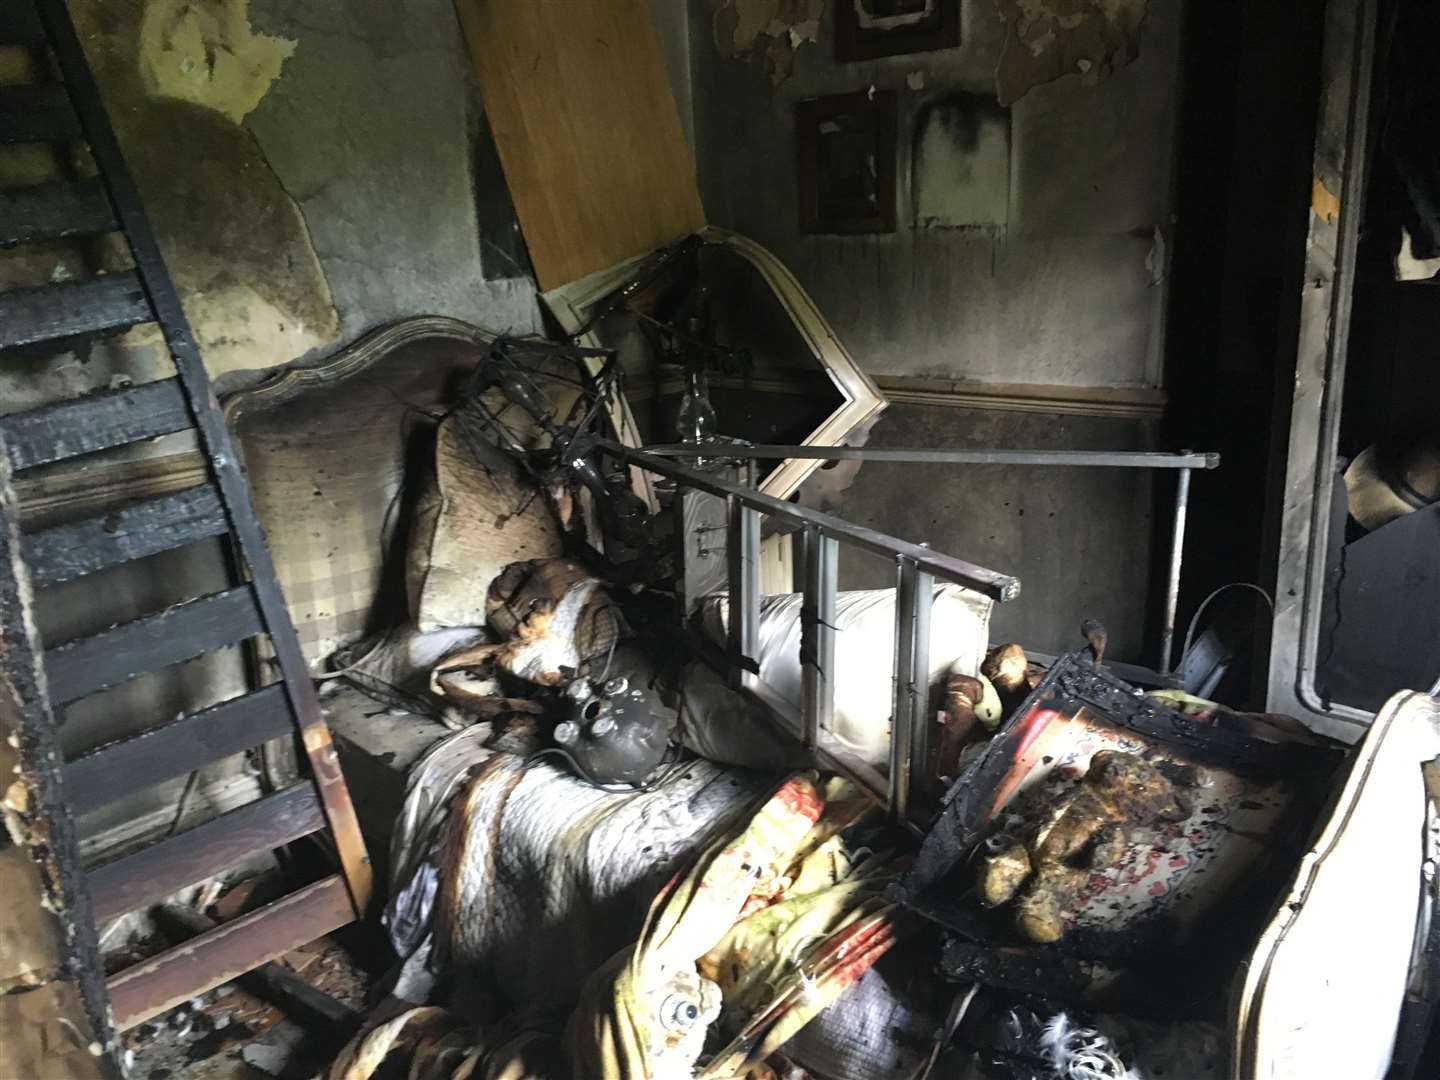 The fire broke out in this room and has destroyed it